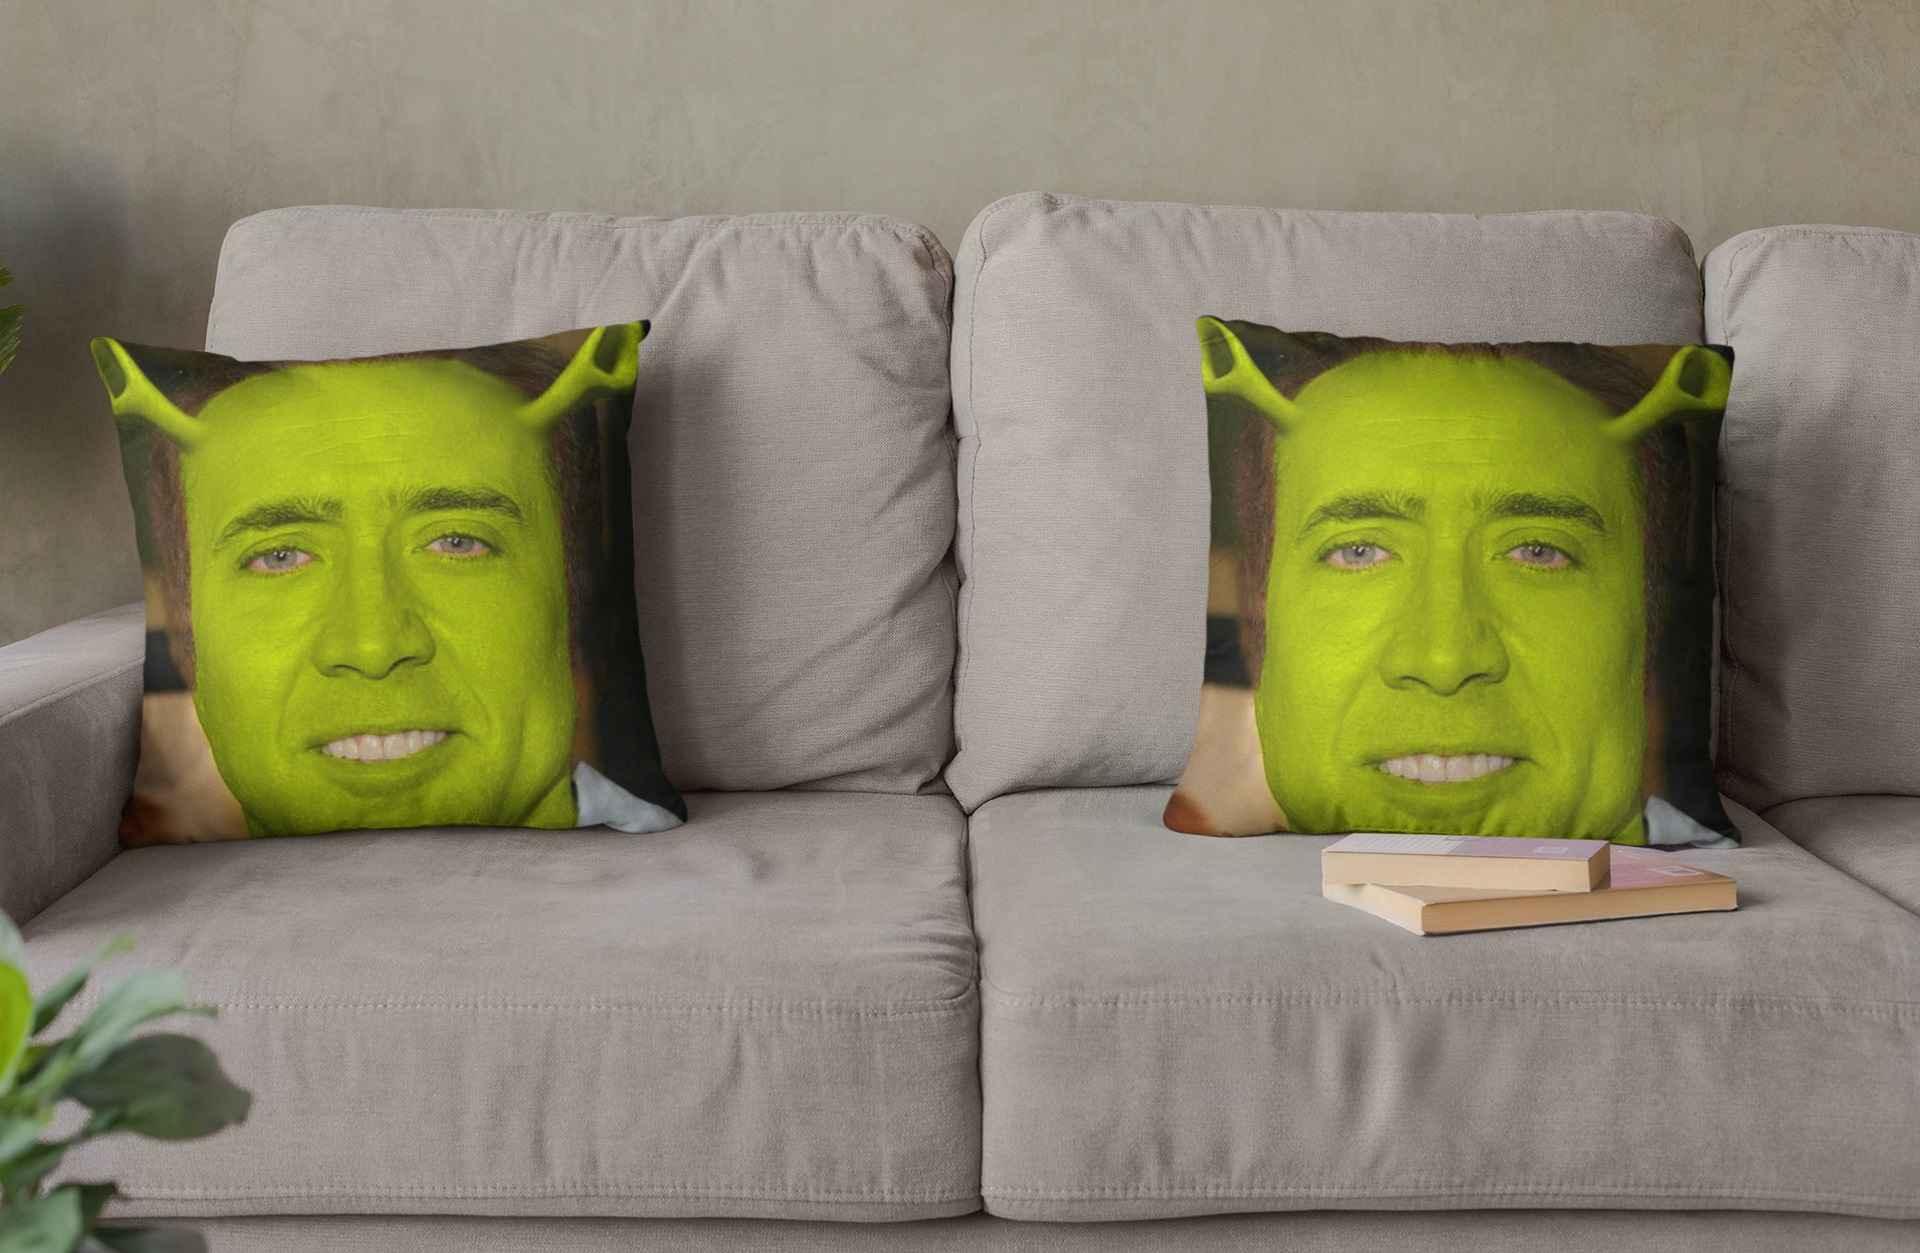 Two Nicolas Cage Shrek pillows positioned at opposite ends of a sofa.